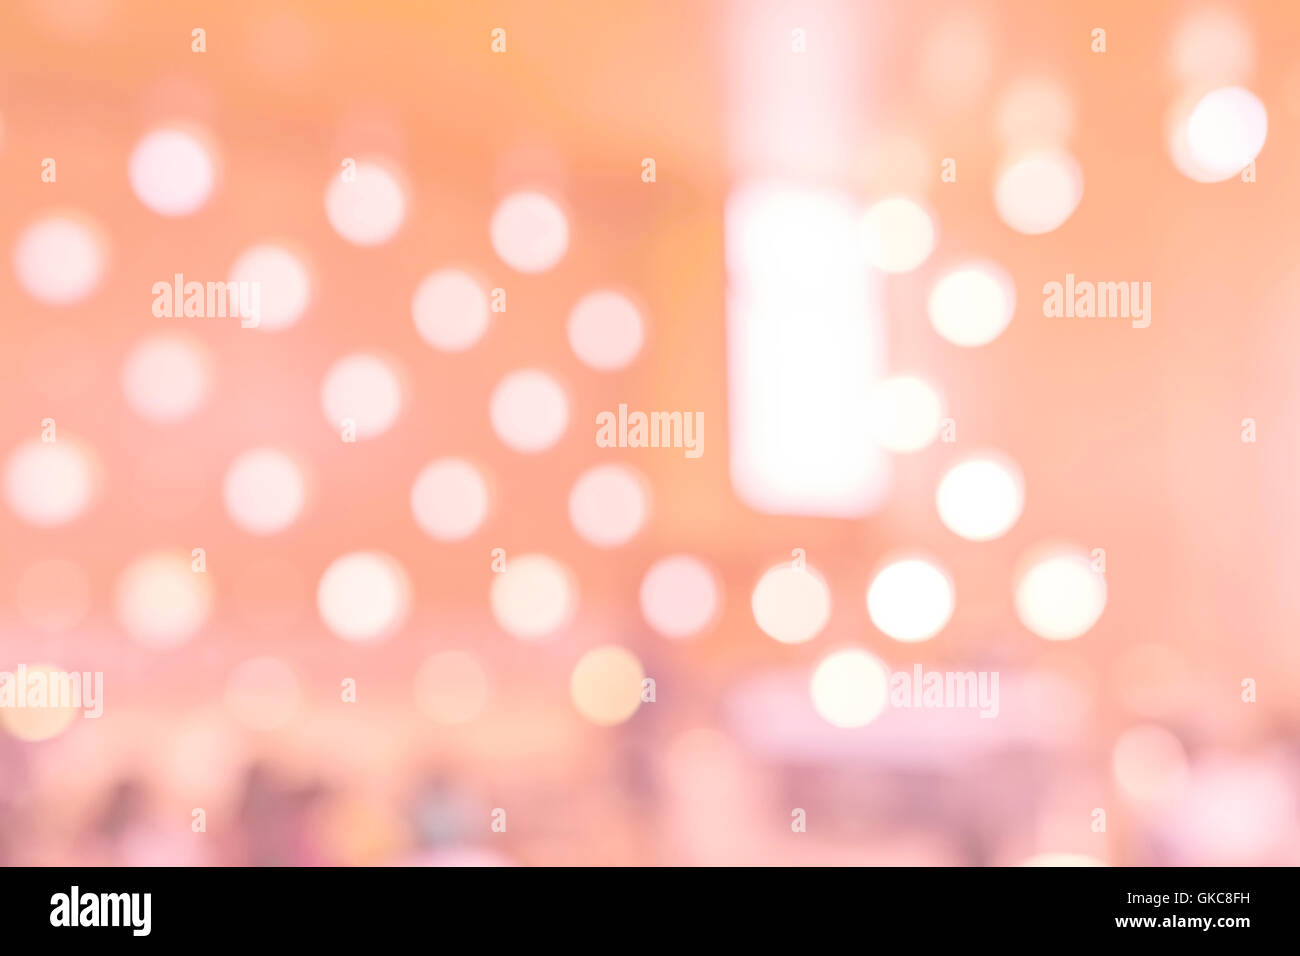 Various shapes abstract blurred background. Stock Photo